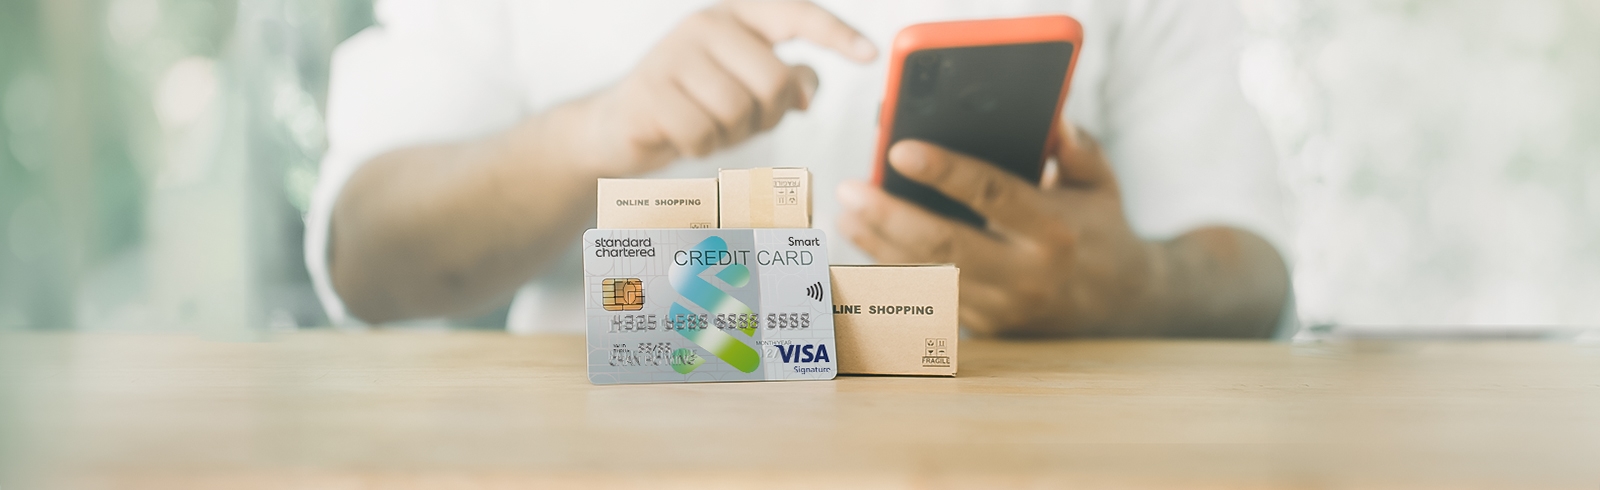 3 Things You Should Know About Using Your Credit Card